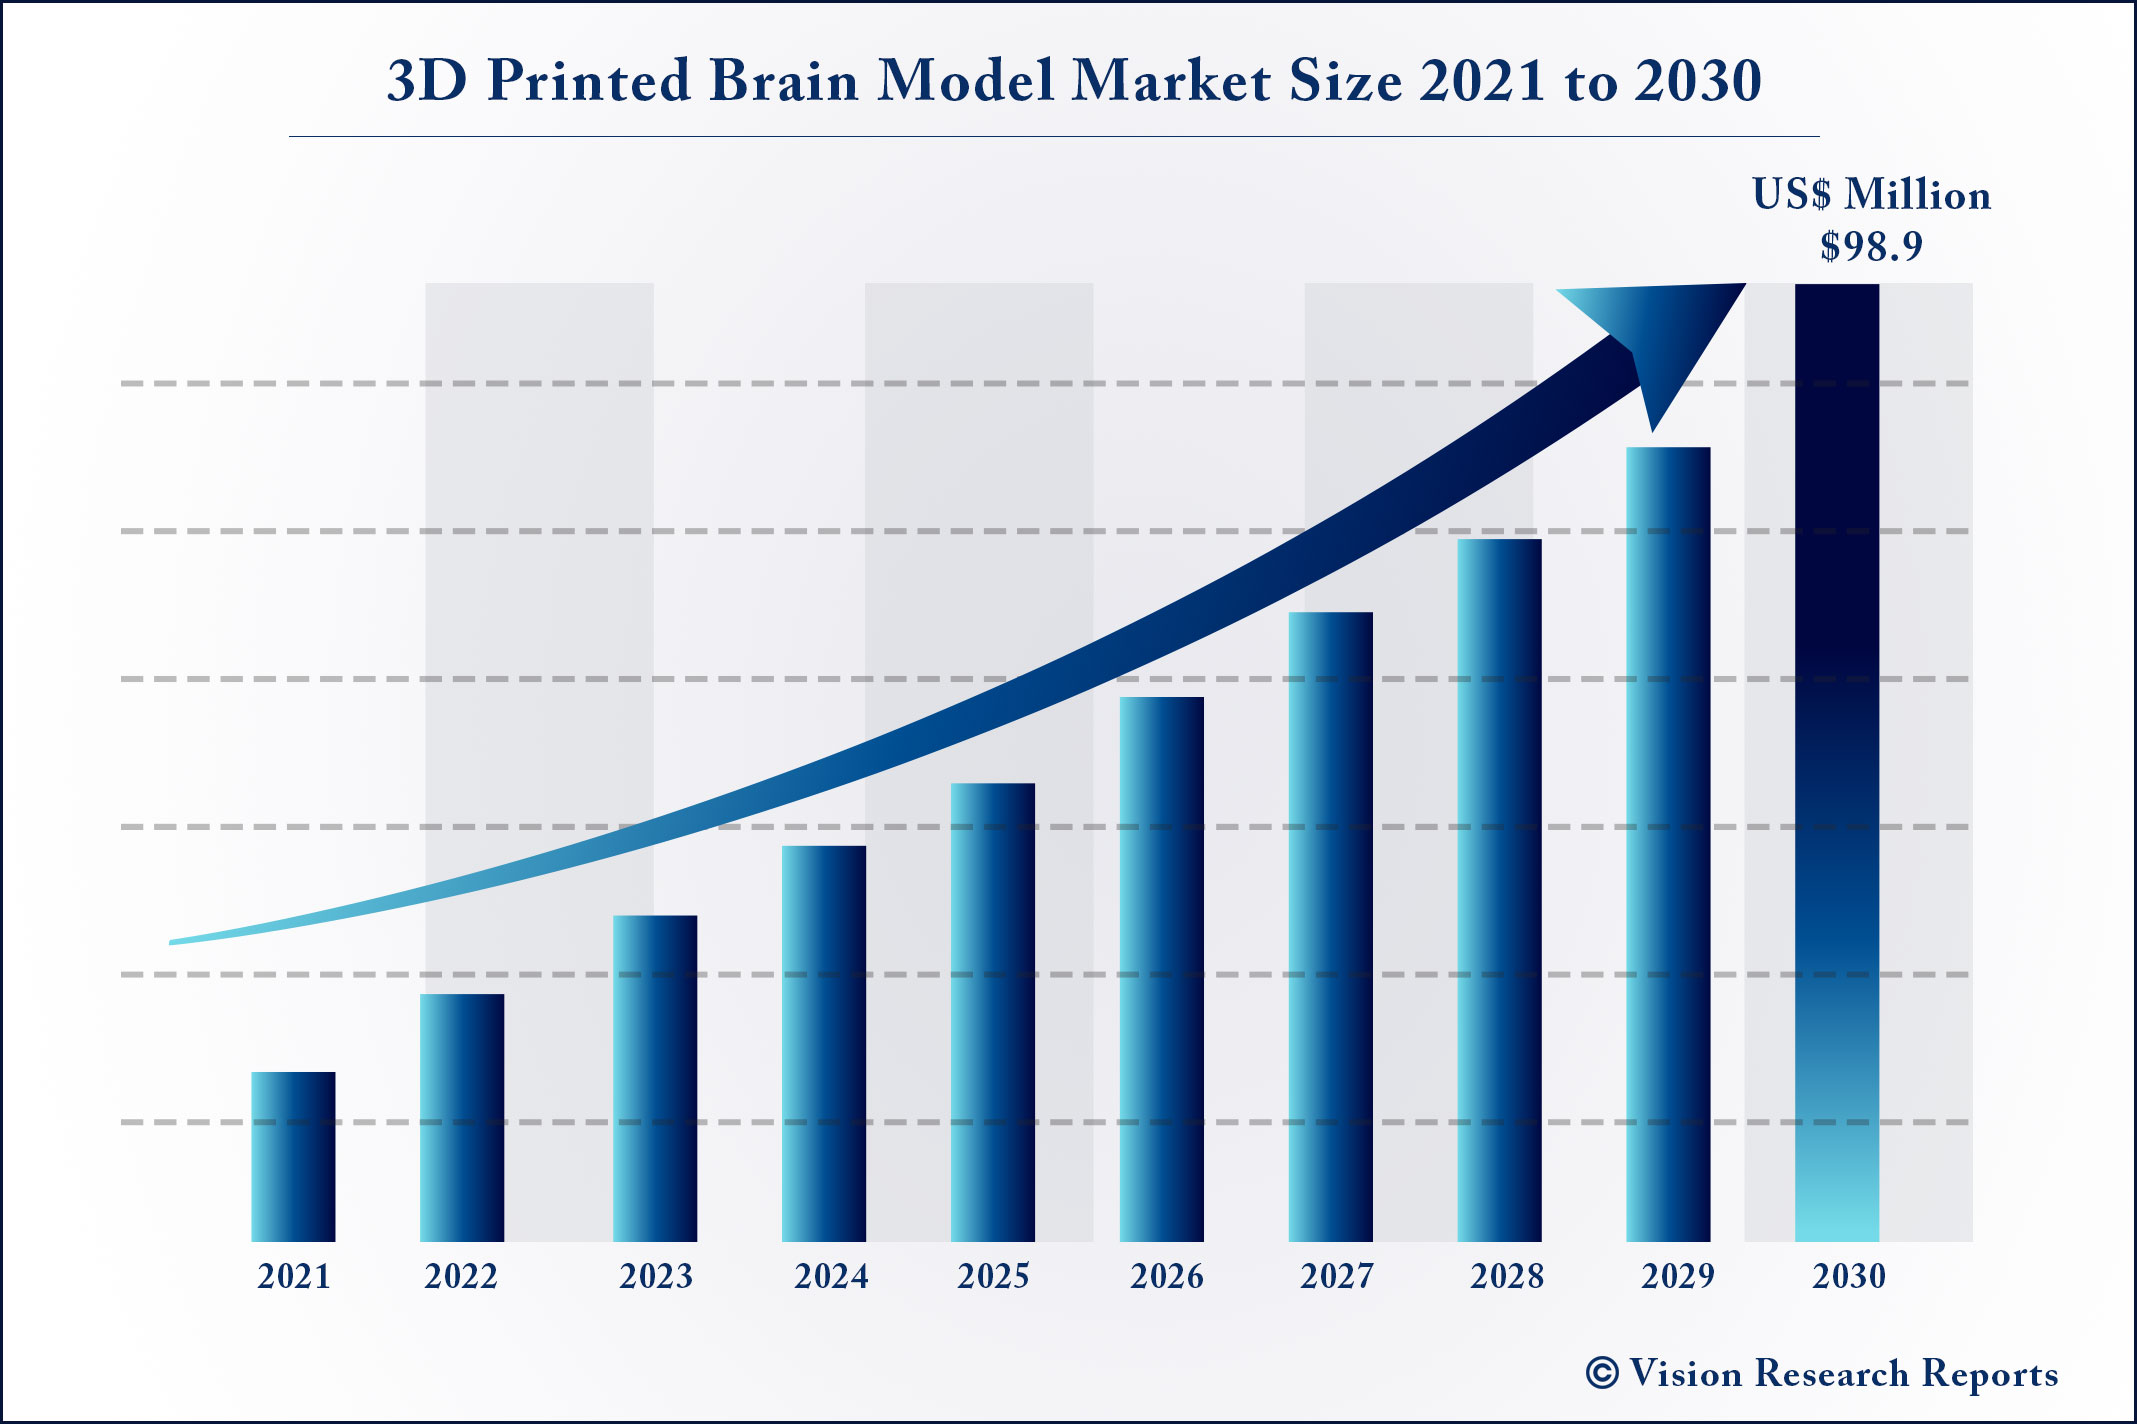 3D Printed Brain Model Market Size 2021 to 2030